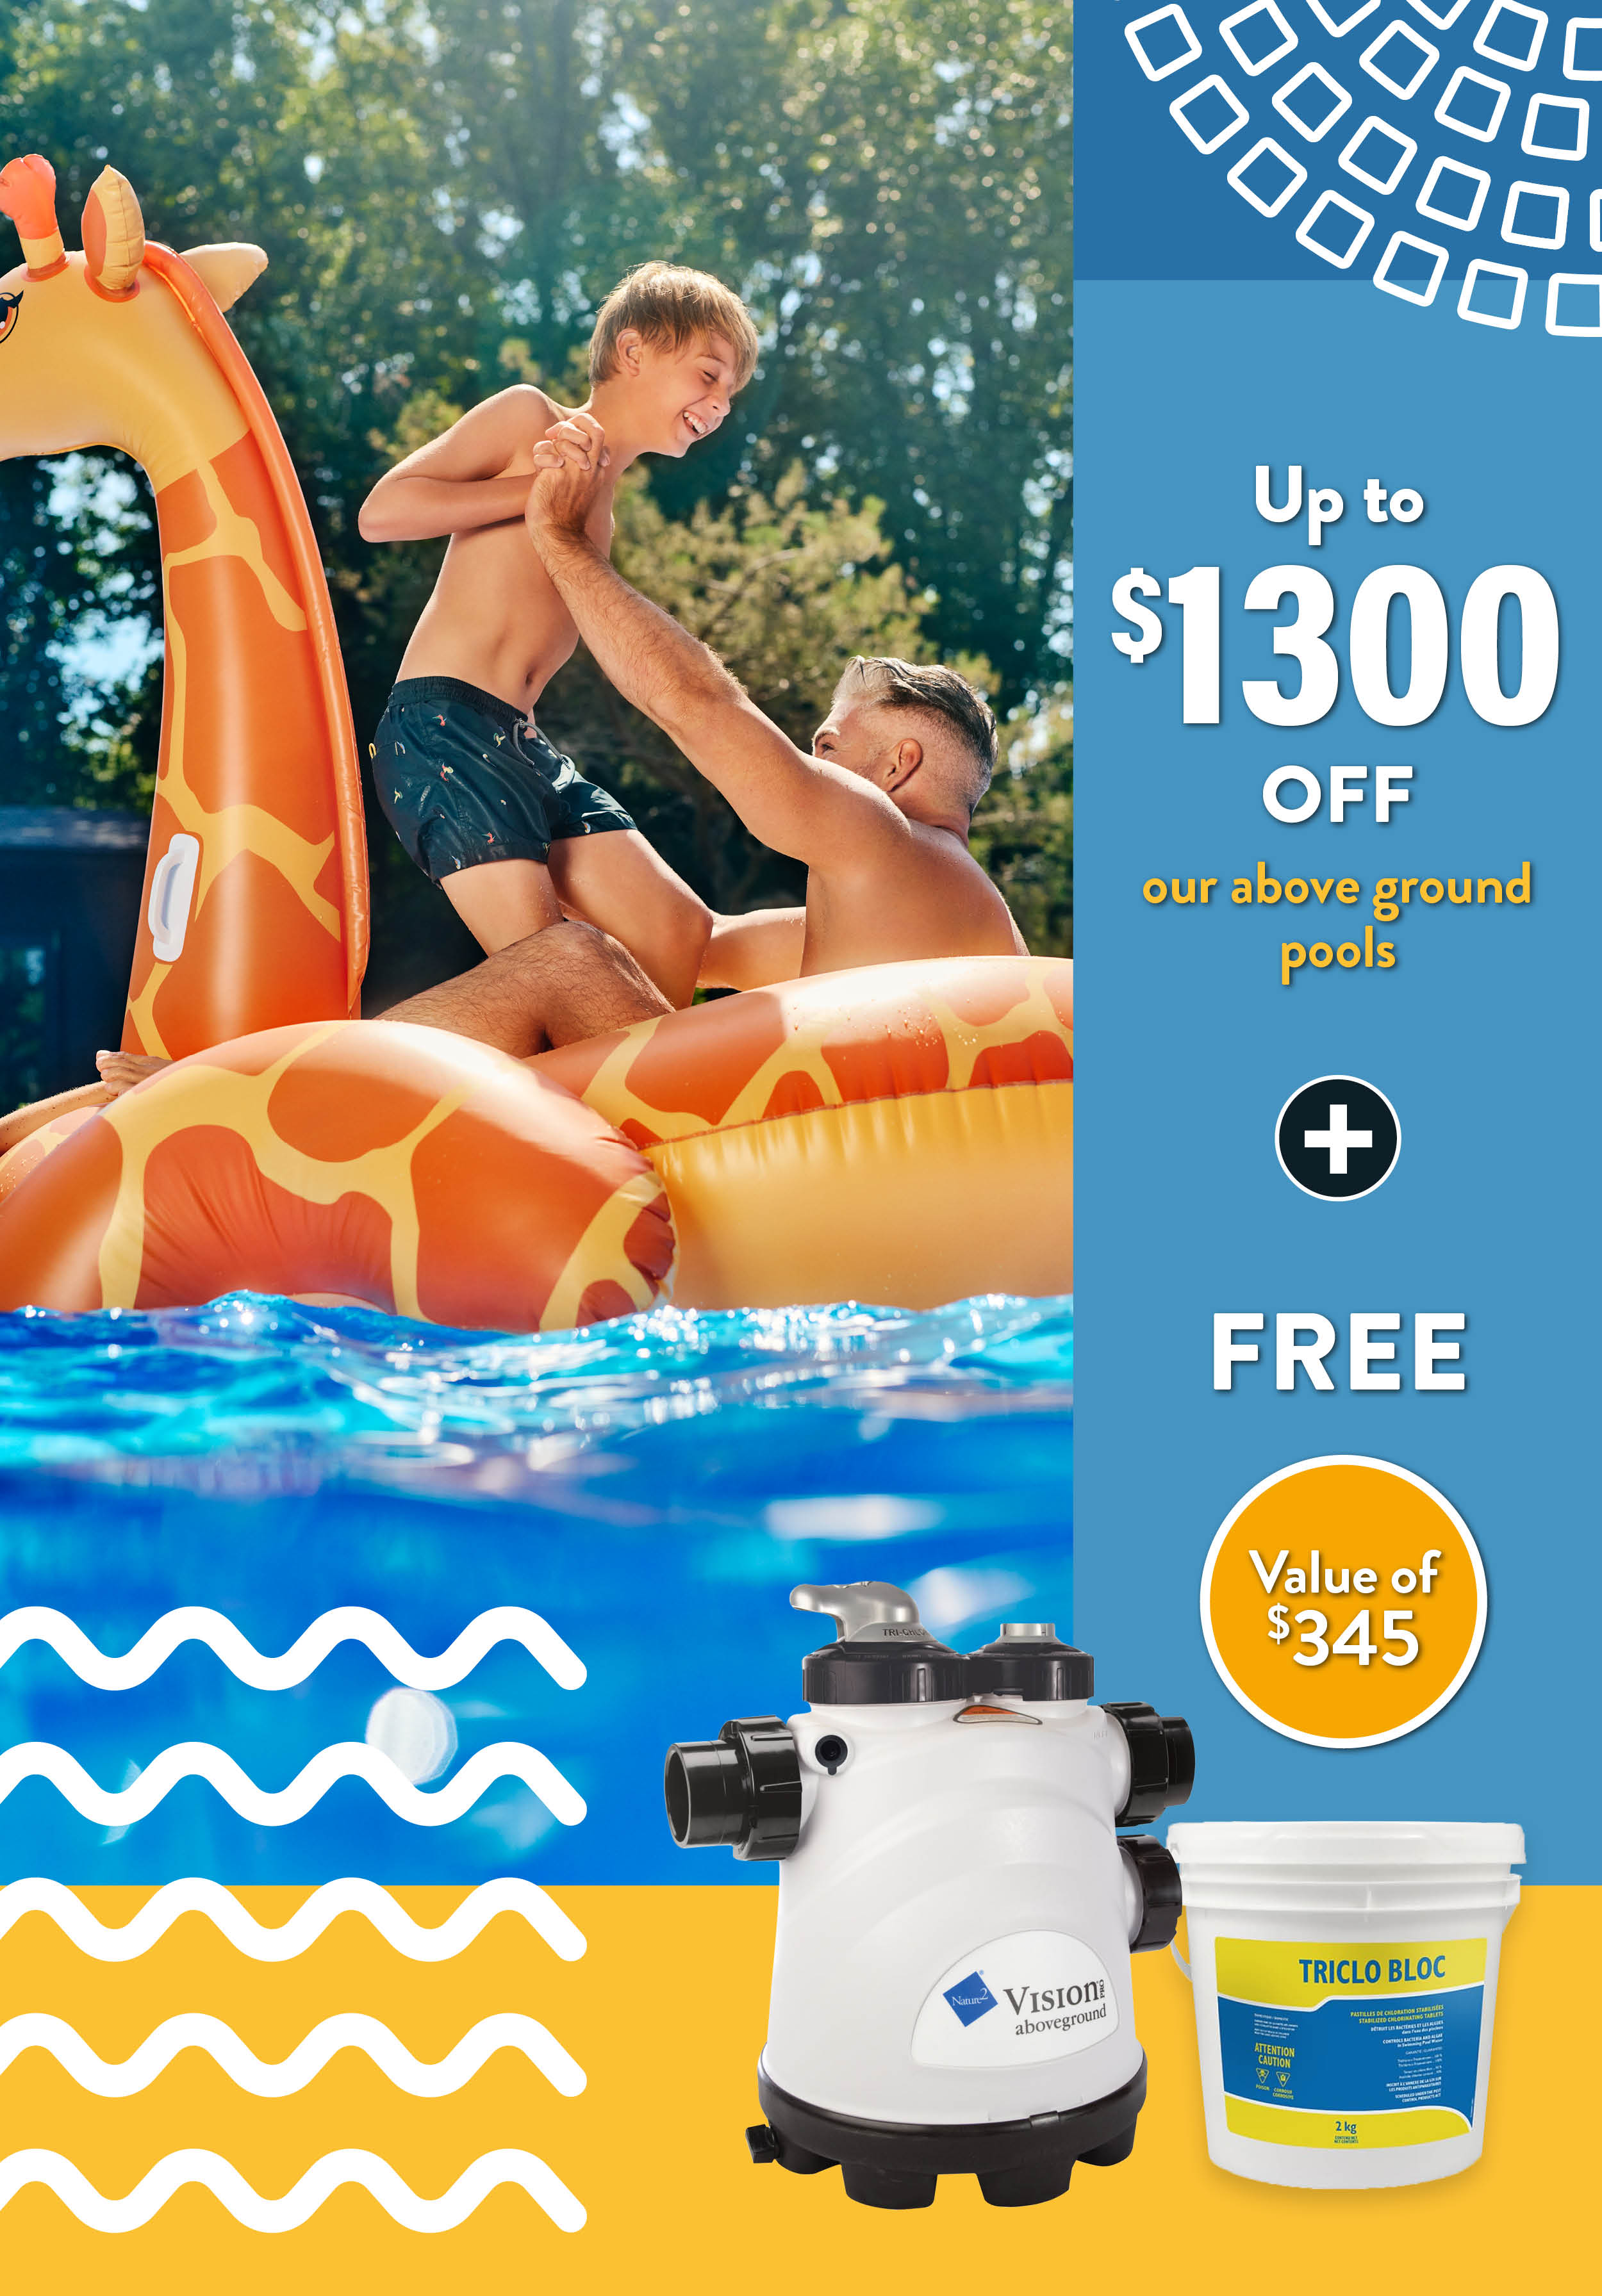 Up to $1,300 off our above ground pools!